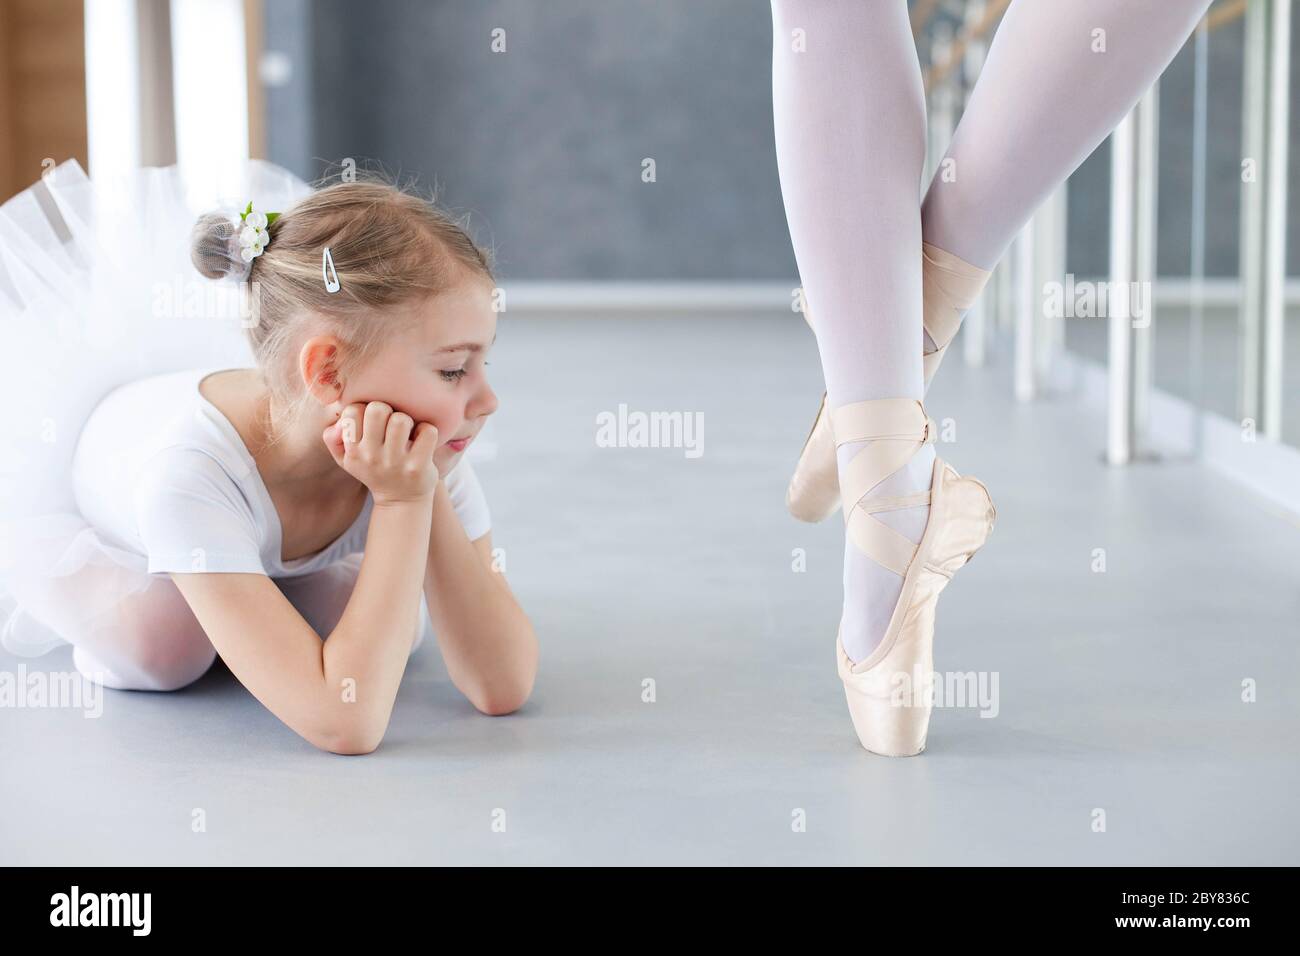 ballet looking shoes